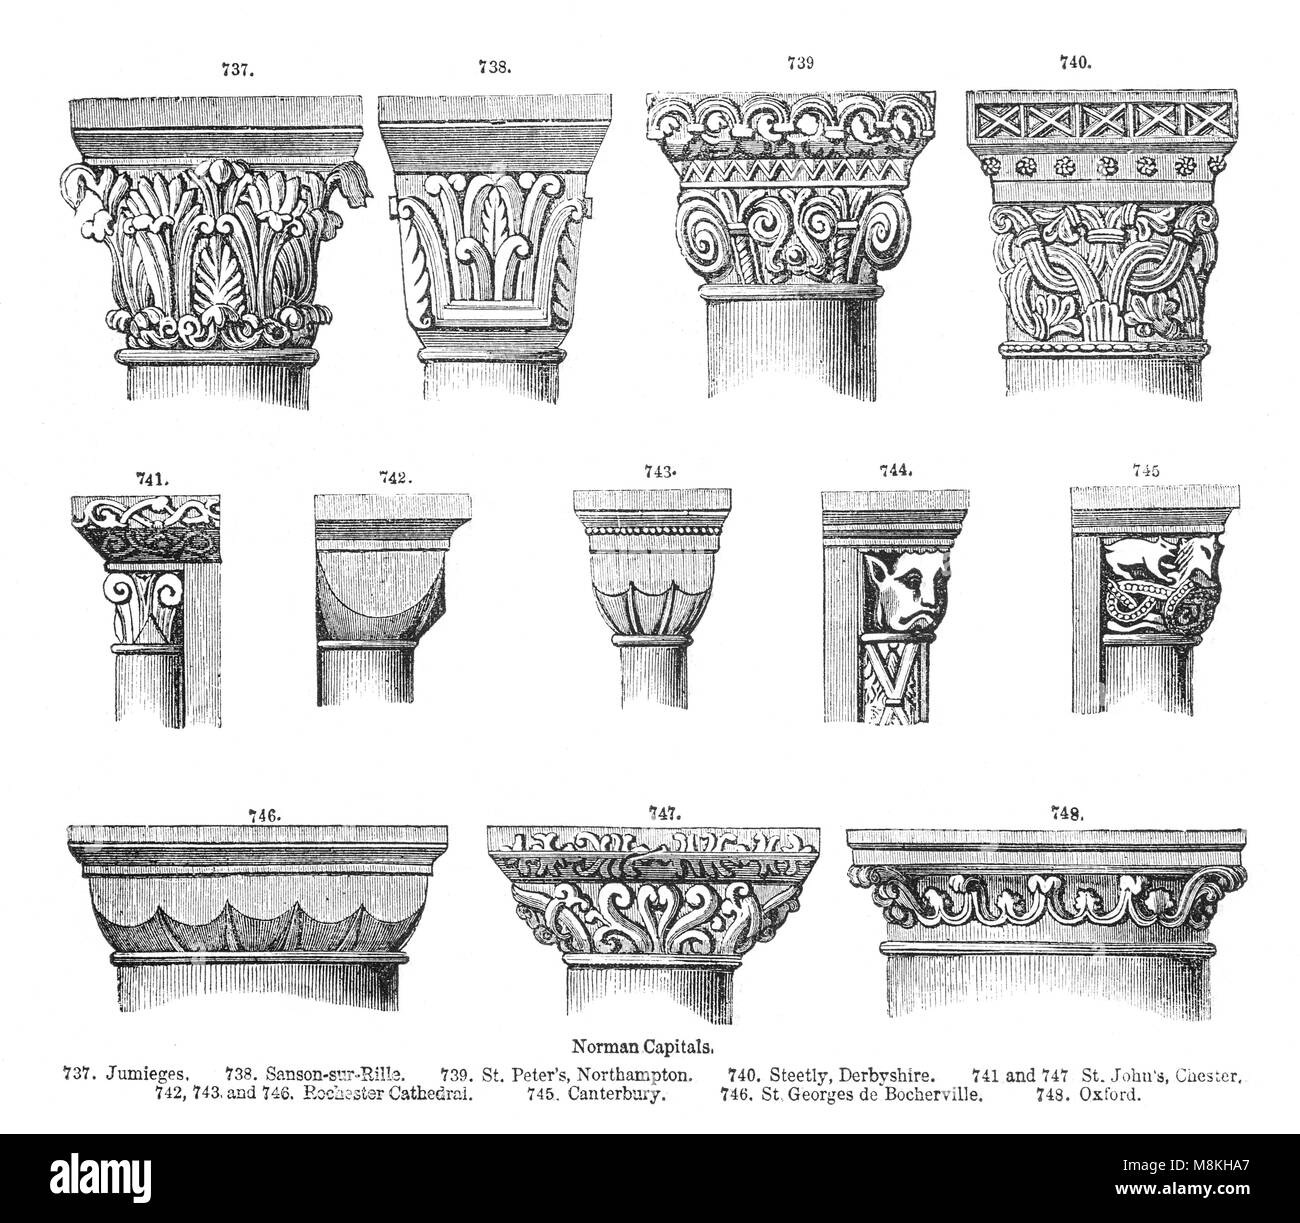 An architectural drawing of Norman Romanesque Capitals. A capital is the wide crown to a column or pilaster, designed to create a base offering structural support to an arch. Capitals were often embellished with highly decorative carvings.   Capitals have several distinct sections. At the top is a broad, flat section called an abacus. This can be unadorned, curved, or moulded. Below the abacus is a more slender section called the necking, tapering down to the shaft in a form loosely resembling an uptured bell. The necking is often joined to the column shaft by a narrow moulding. Stock Photo